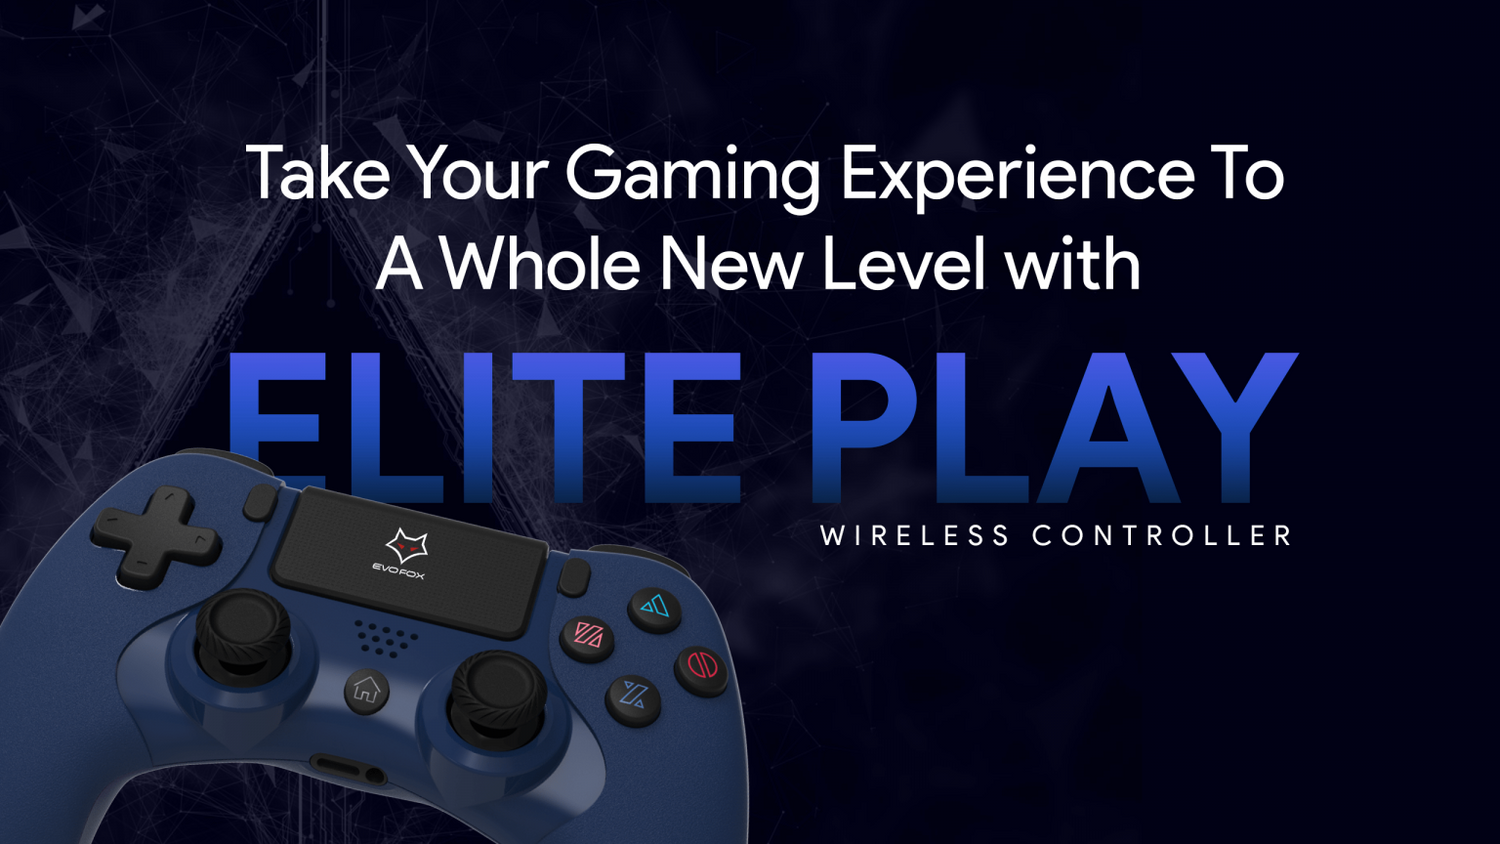 Take Your Gaming Experience To A Whole New Level with Elite Play Wireless Controller